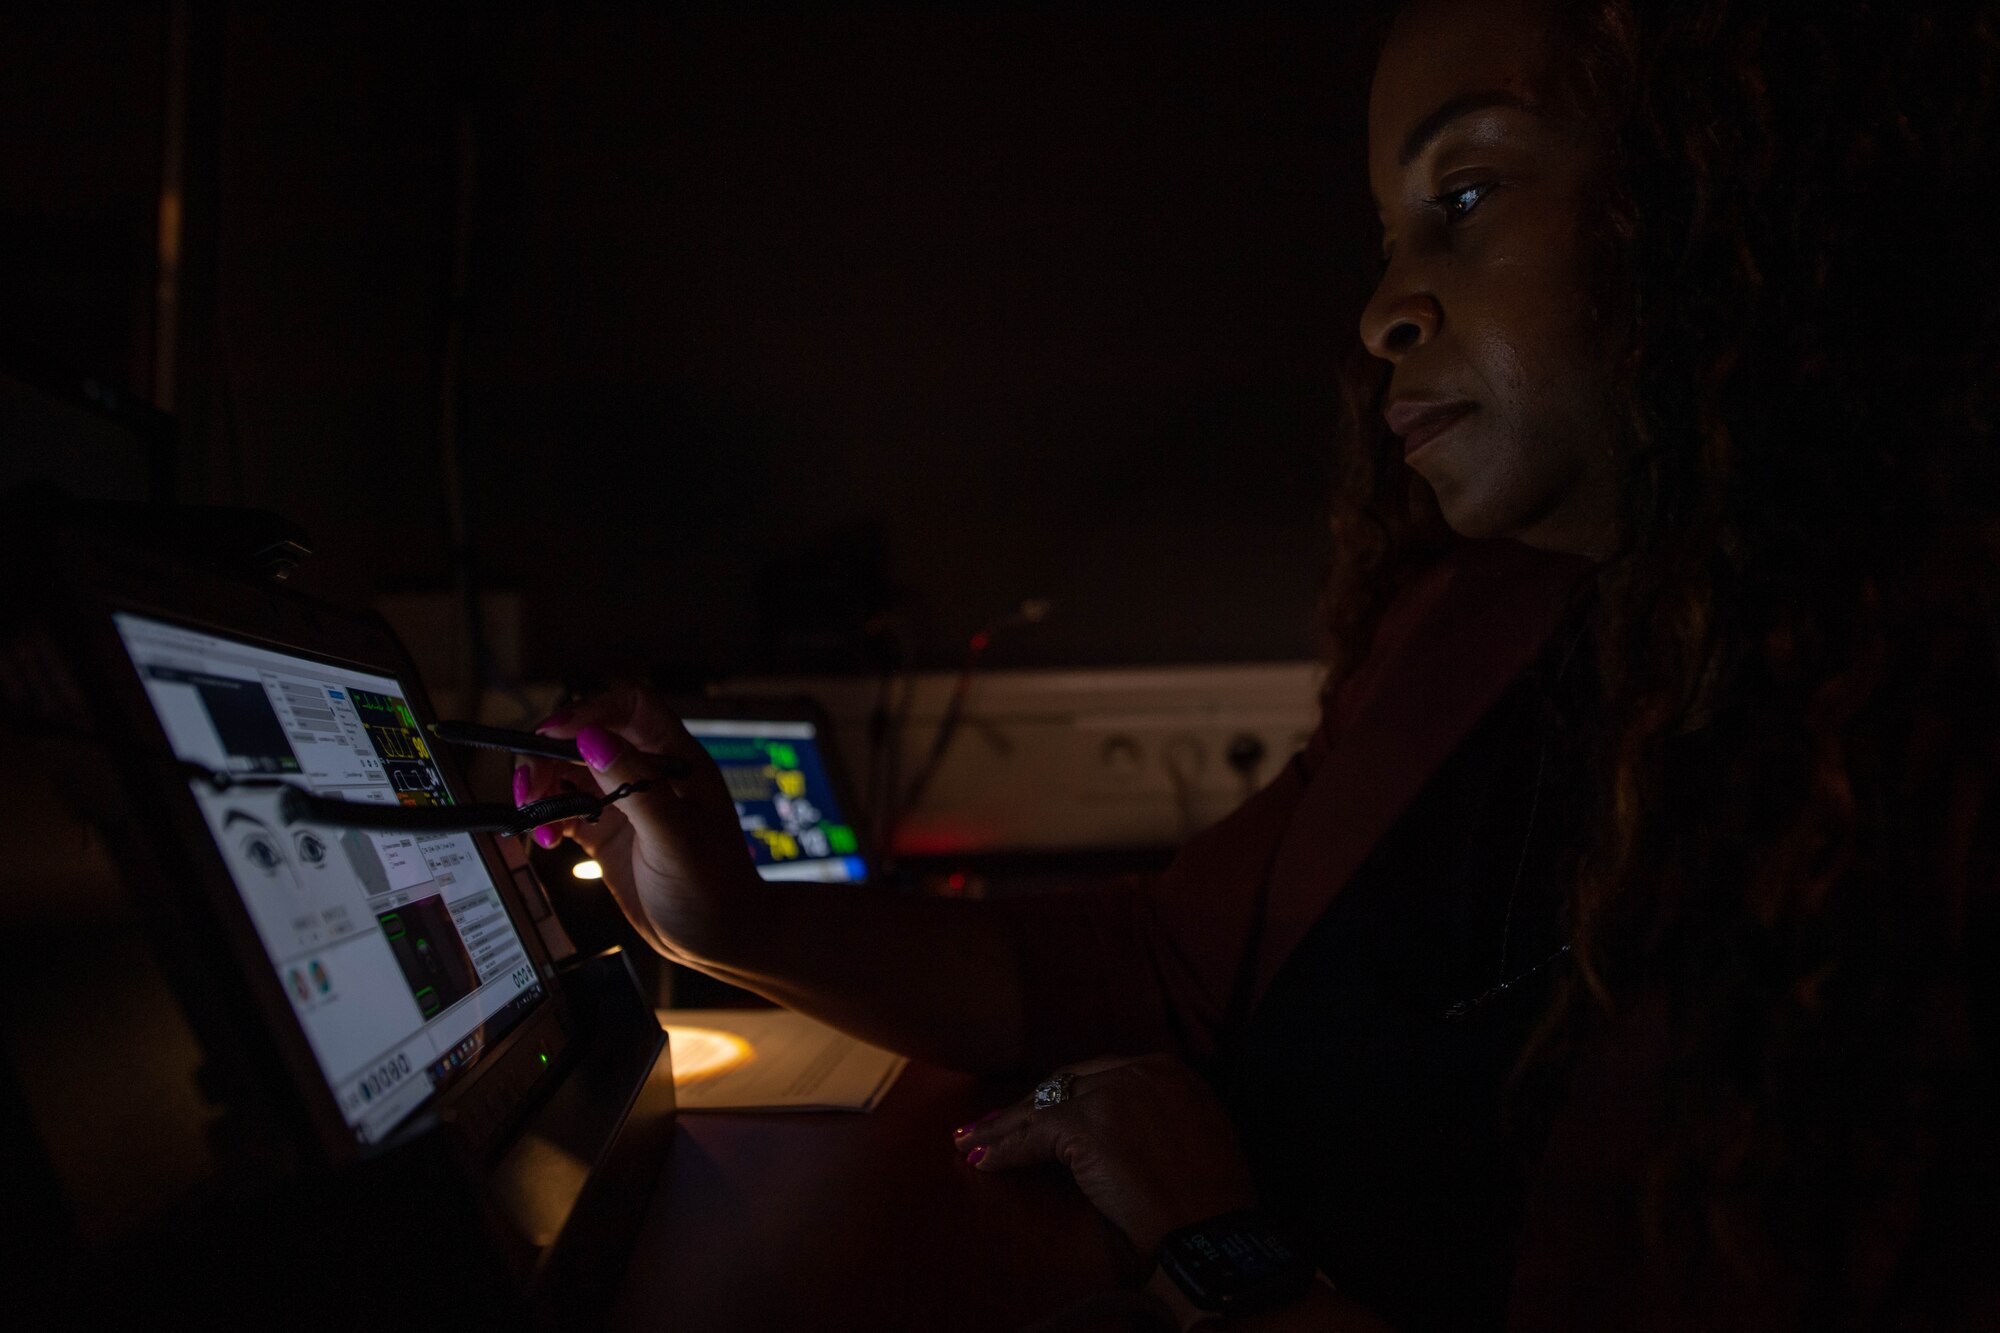 Brenda Robinson, 86th Aeromedical Evacuation Squadron, Air Force Medical Modeling and Simulation Training healthcare simulation operations specialist, interacts with a control tablet during the interactive portion of clinical simulator training at Ramstein Air Base, Germany, Aug. 1, 2023.